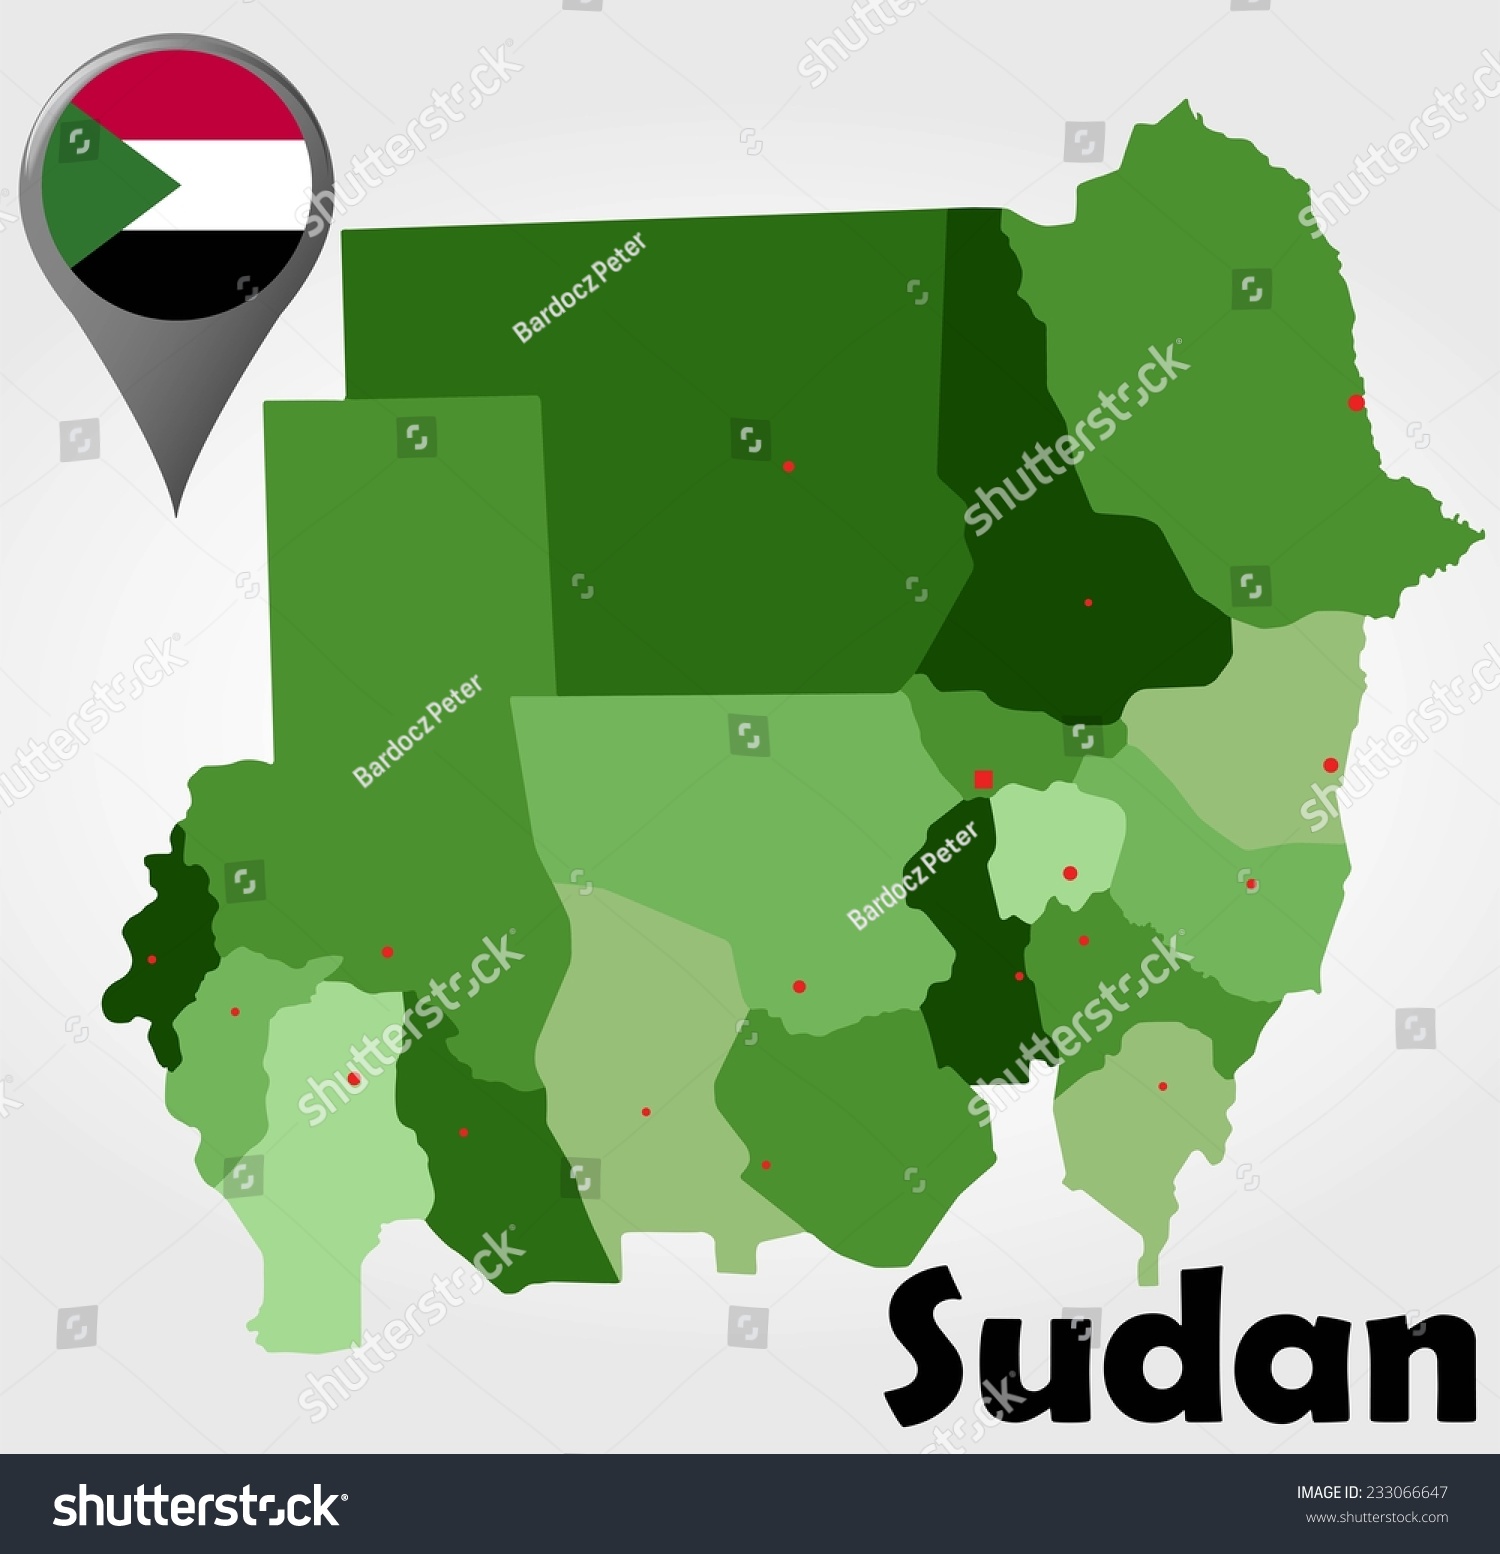 Sudan political map with green shades and map pointer. #233066647